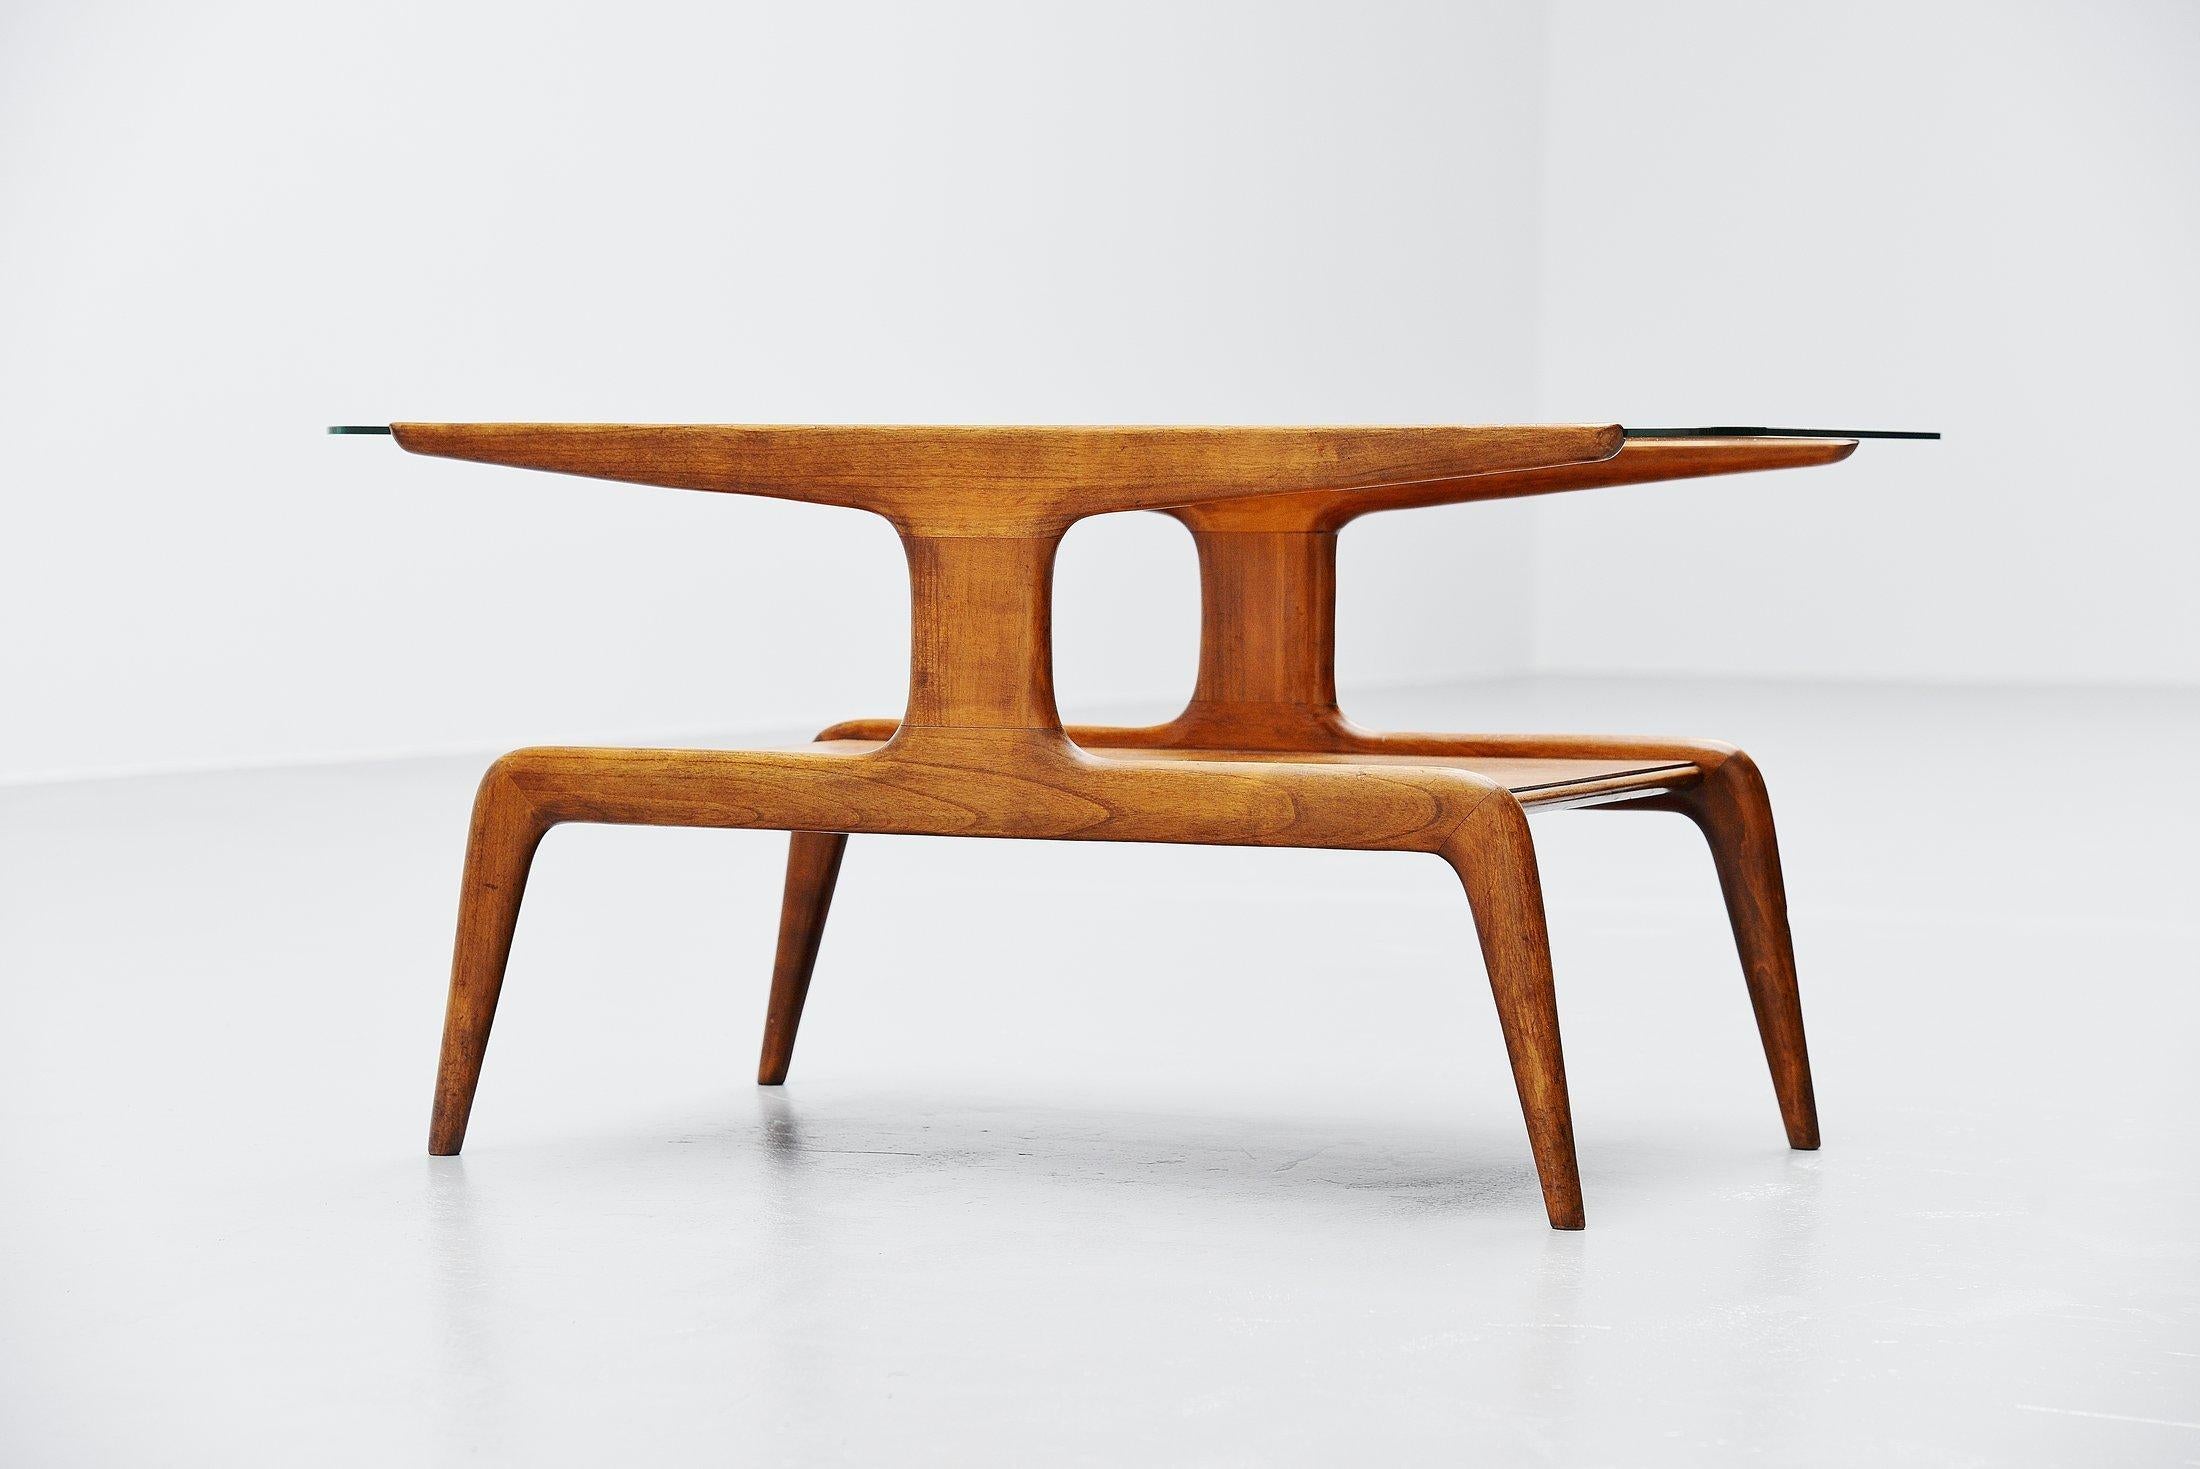 Very nice sculptural coffee table designed by Gio Ponti for the store ‘La Rinascente’, Italy 1950. This table was made of walnut wood and gas a glass top. There is a very nice pattern on the lower part of the table, looks like a diamond. The table